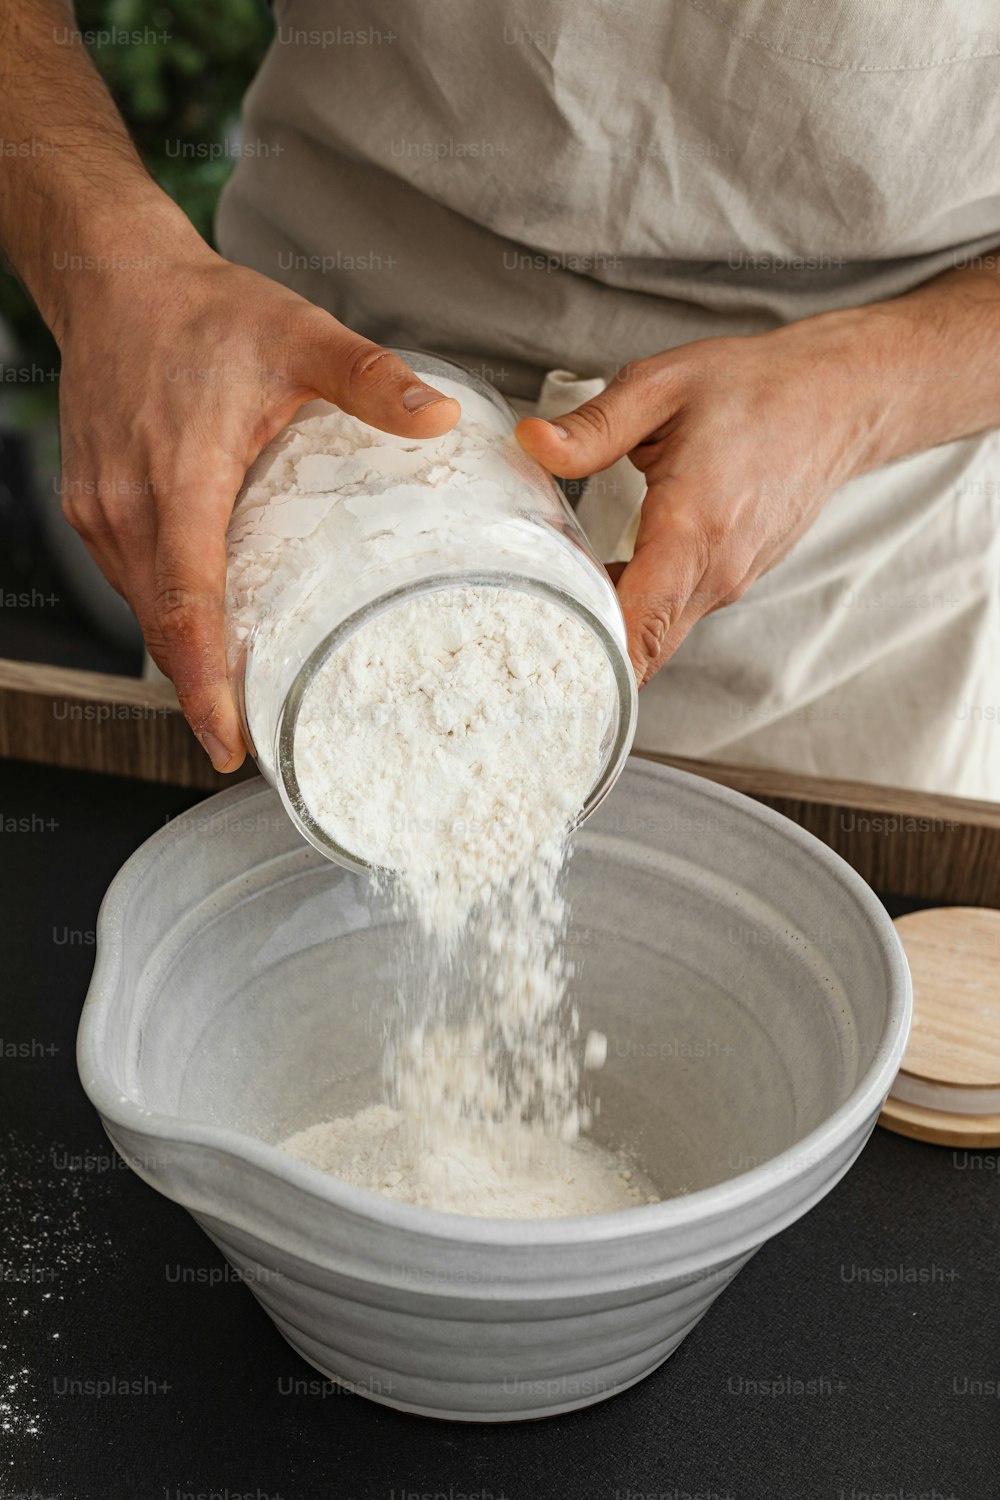 a person pouring flour into a bowl on a table